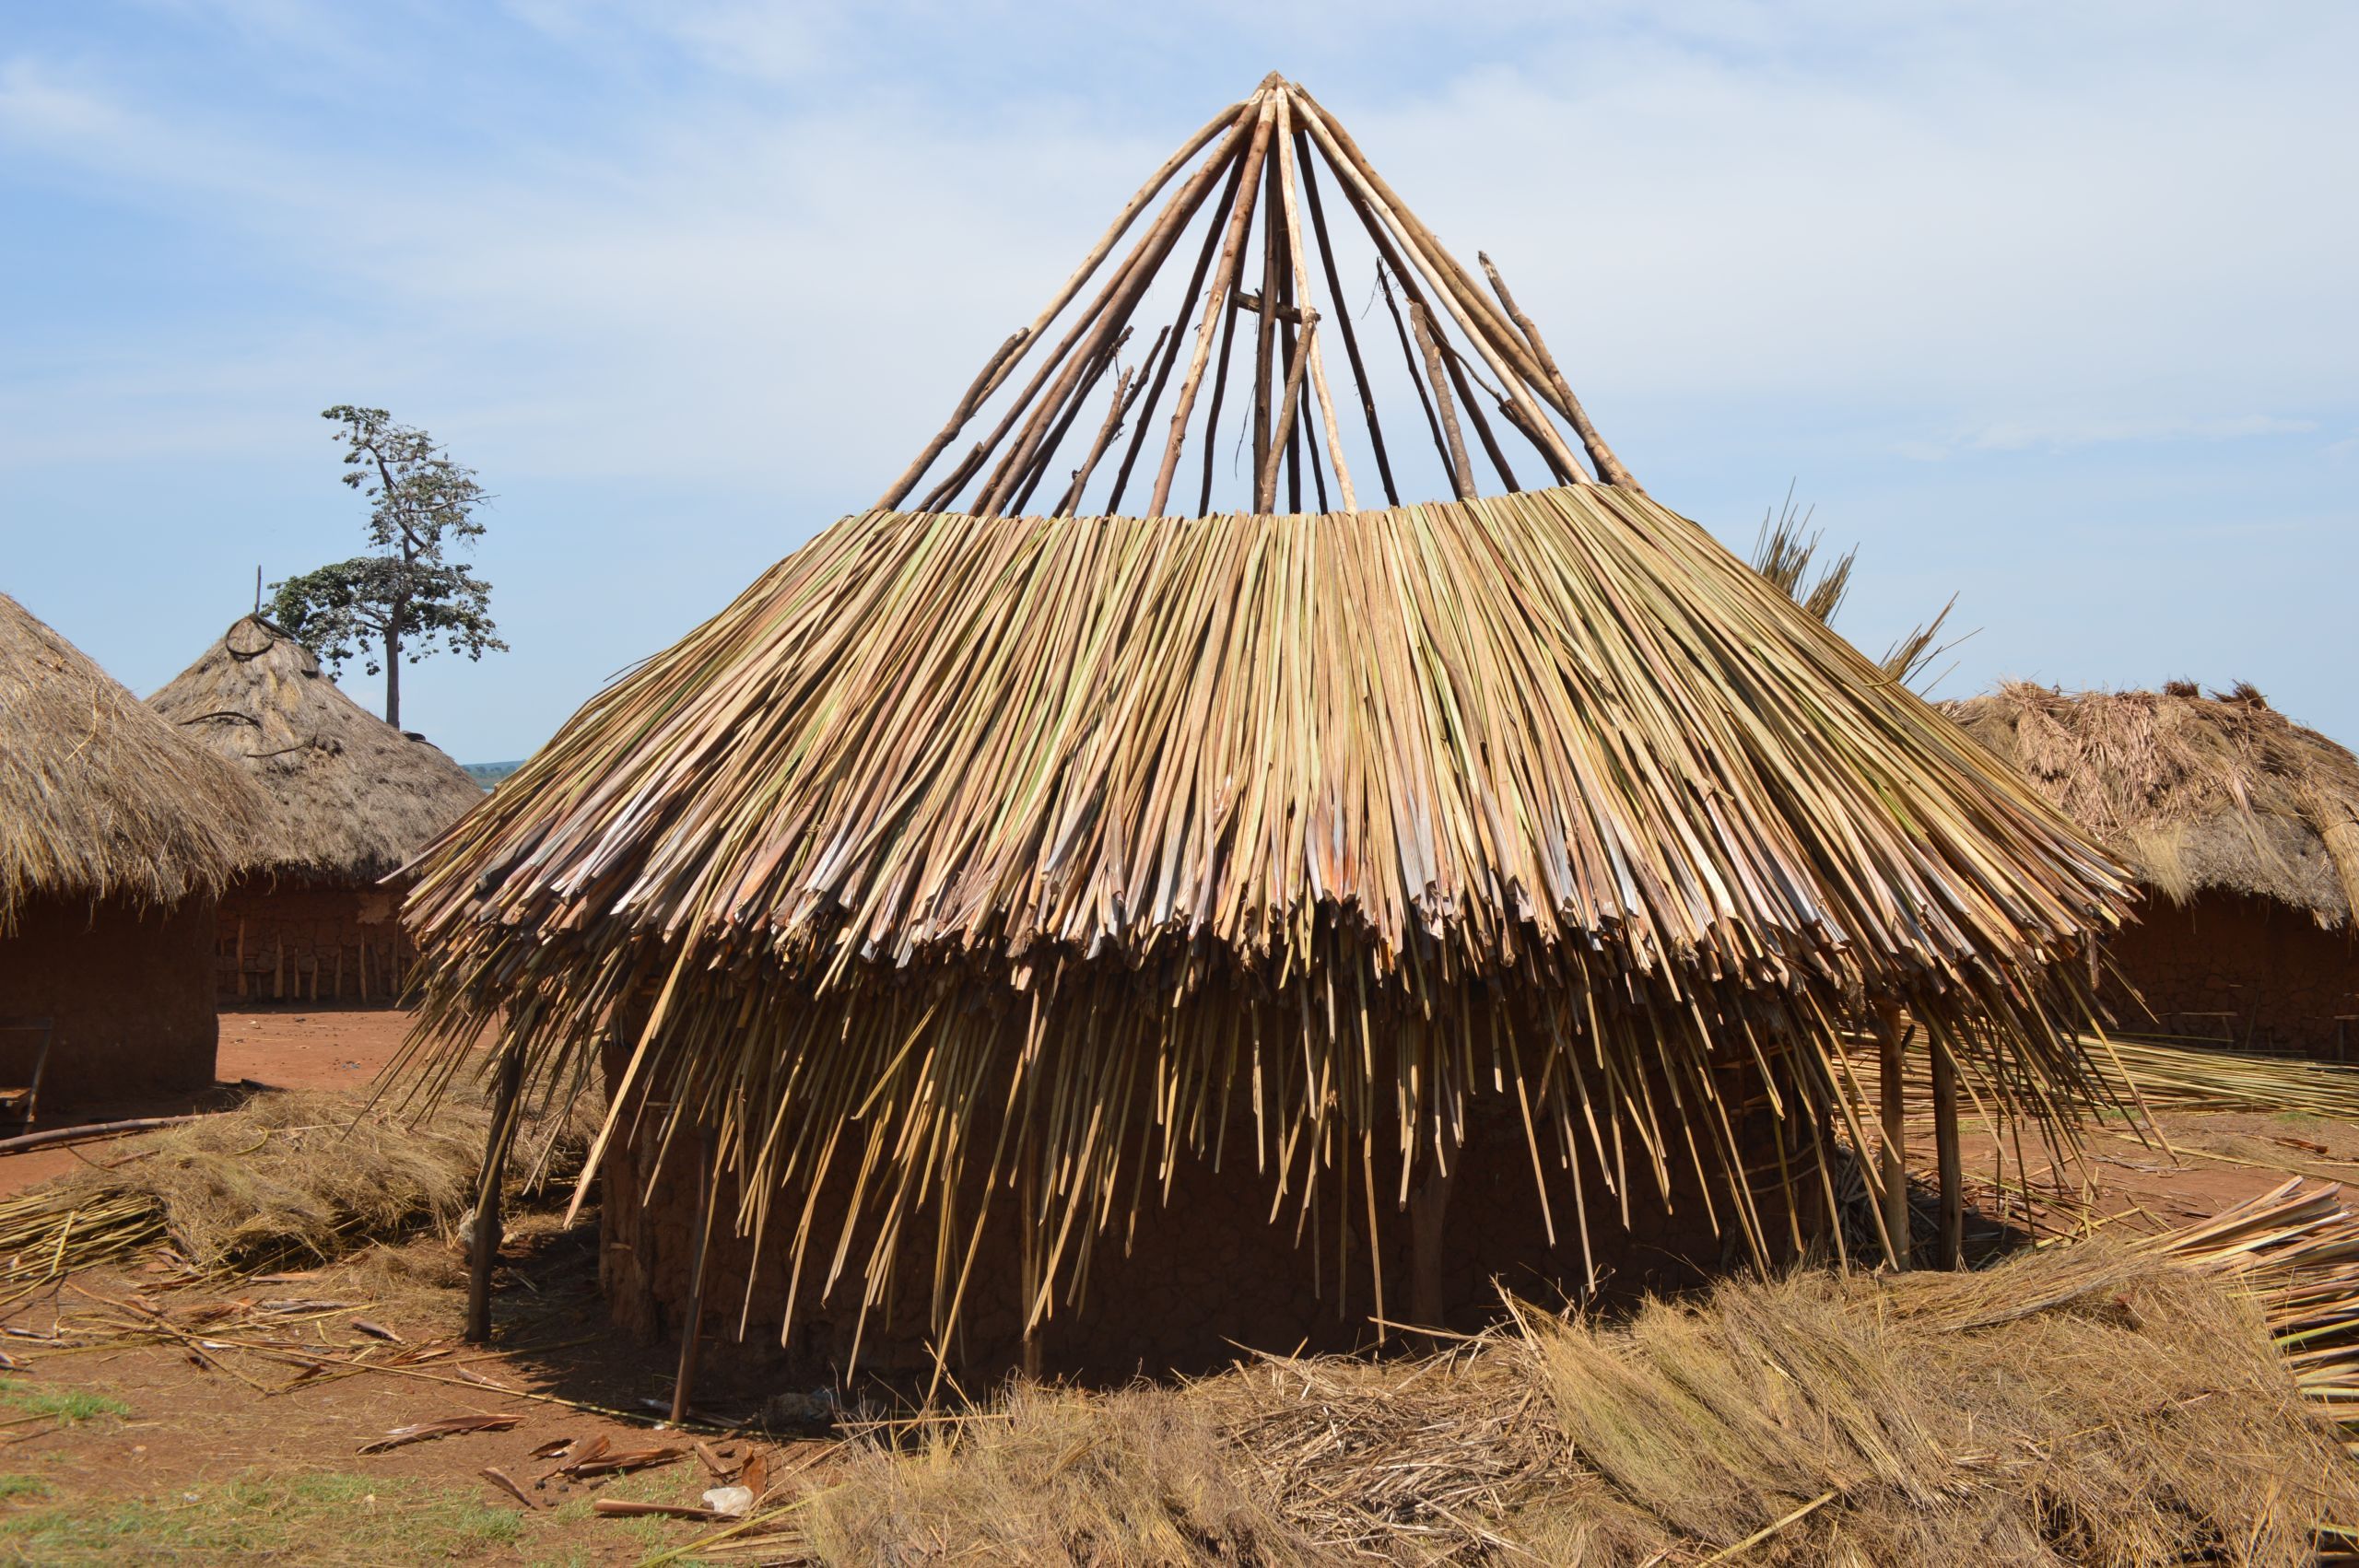 A grass-thatched house being completed in Walumbe village. According to Busoga Forestry Company, no permanent structures are allowed in the forest reserve. Image by Annika McGinnis. Uganda, 2019. 

